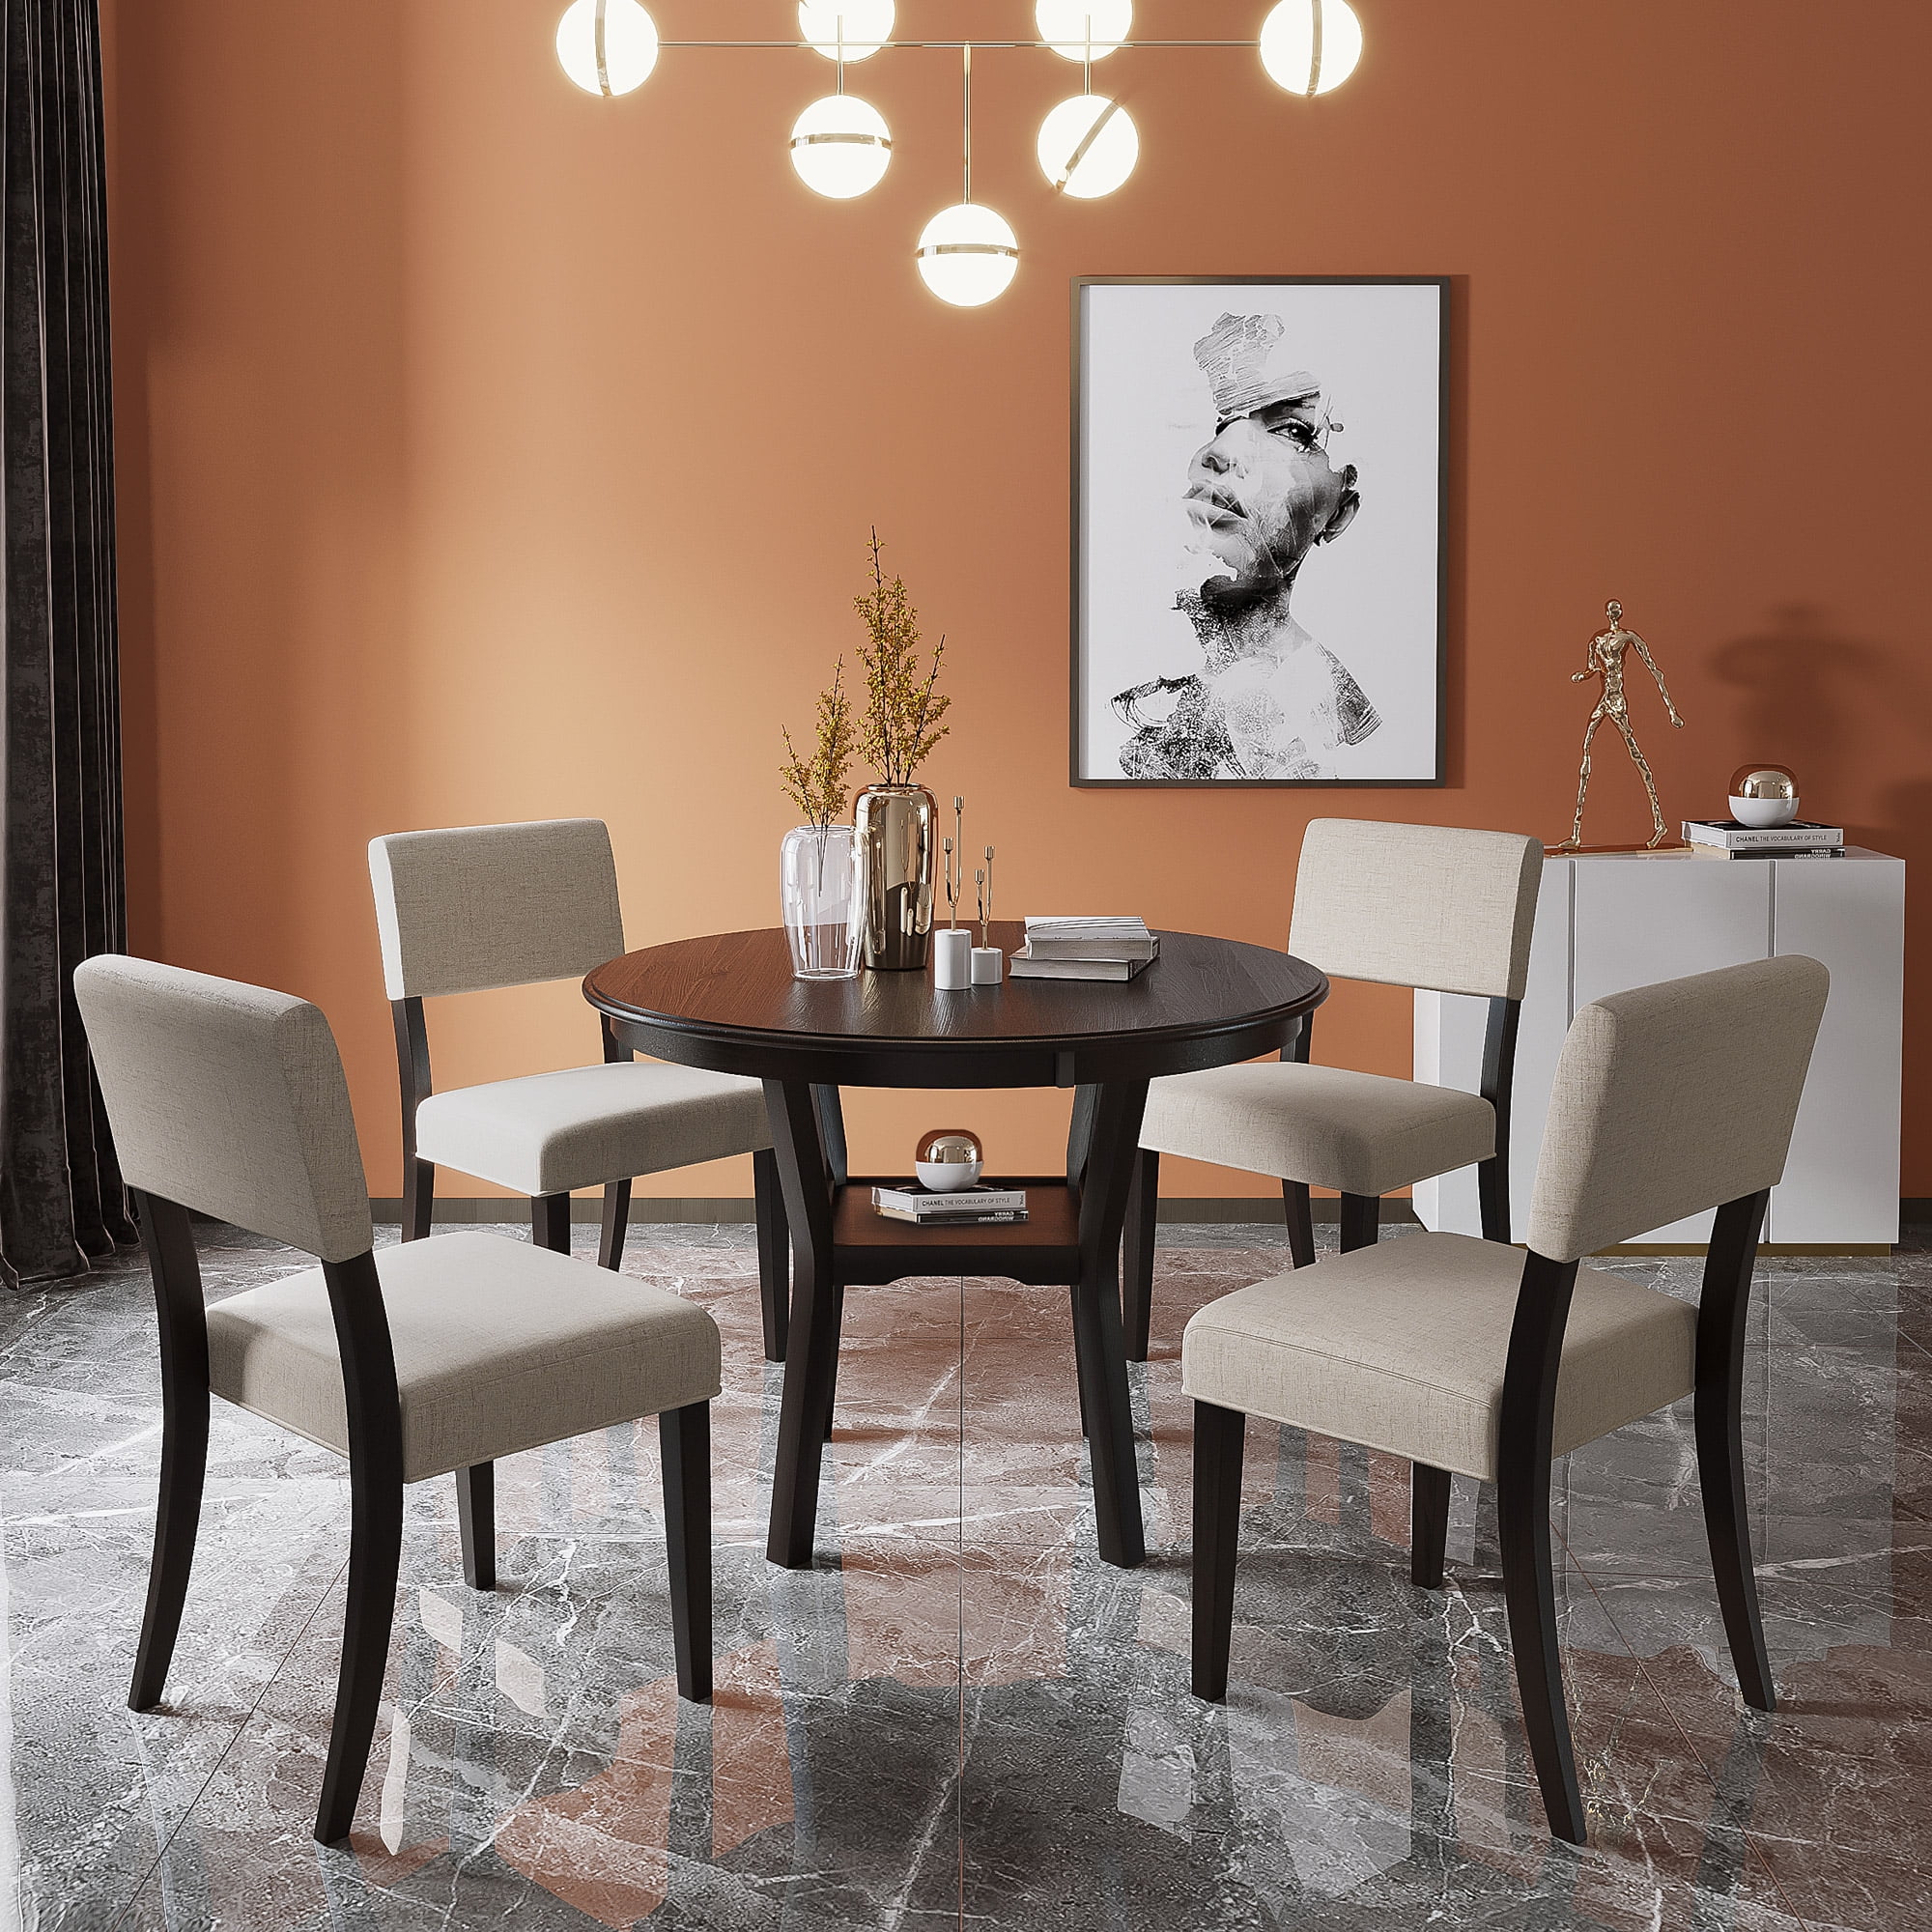 5 Piece Dining Table Set Round, Round Table Dining Set For 5